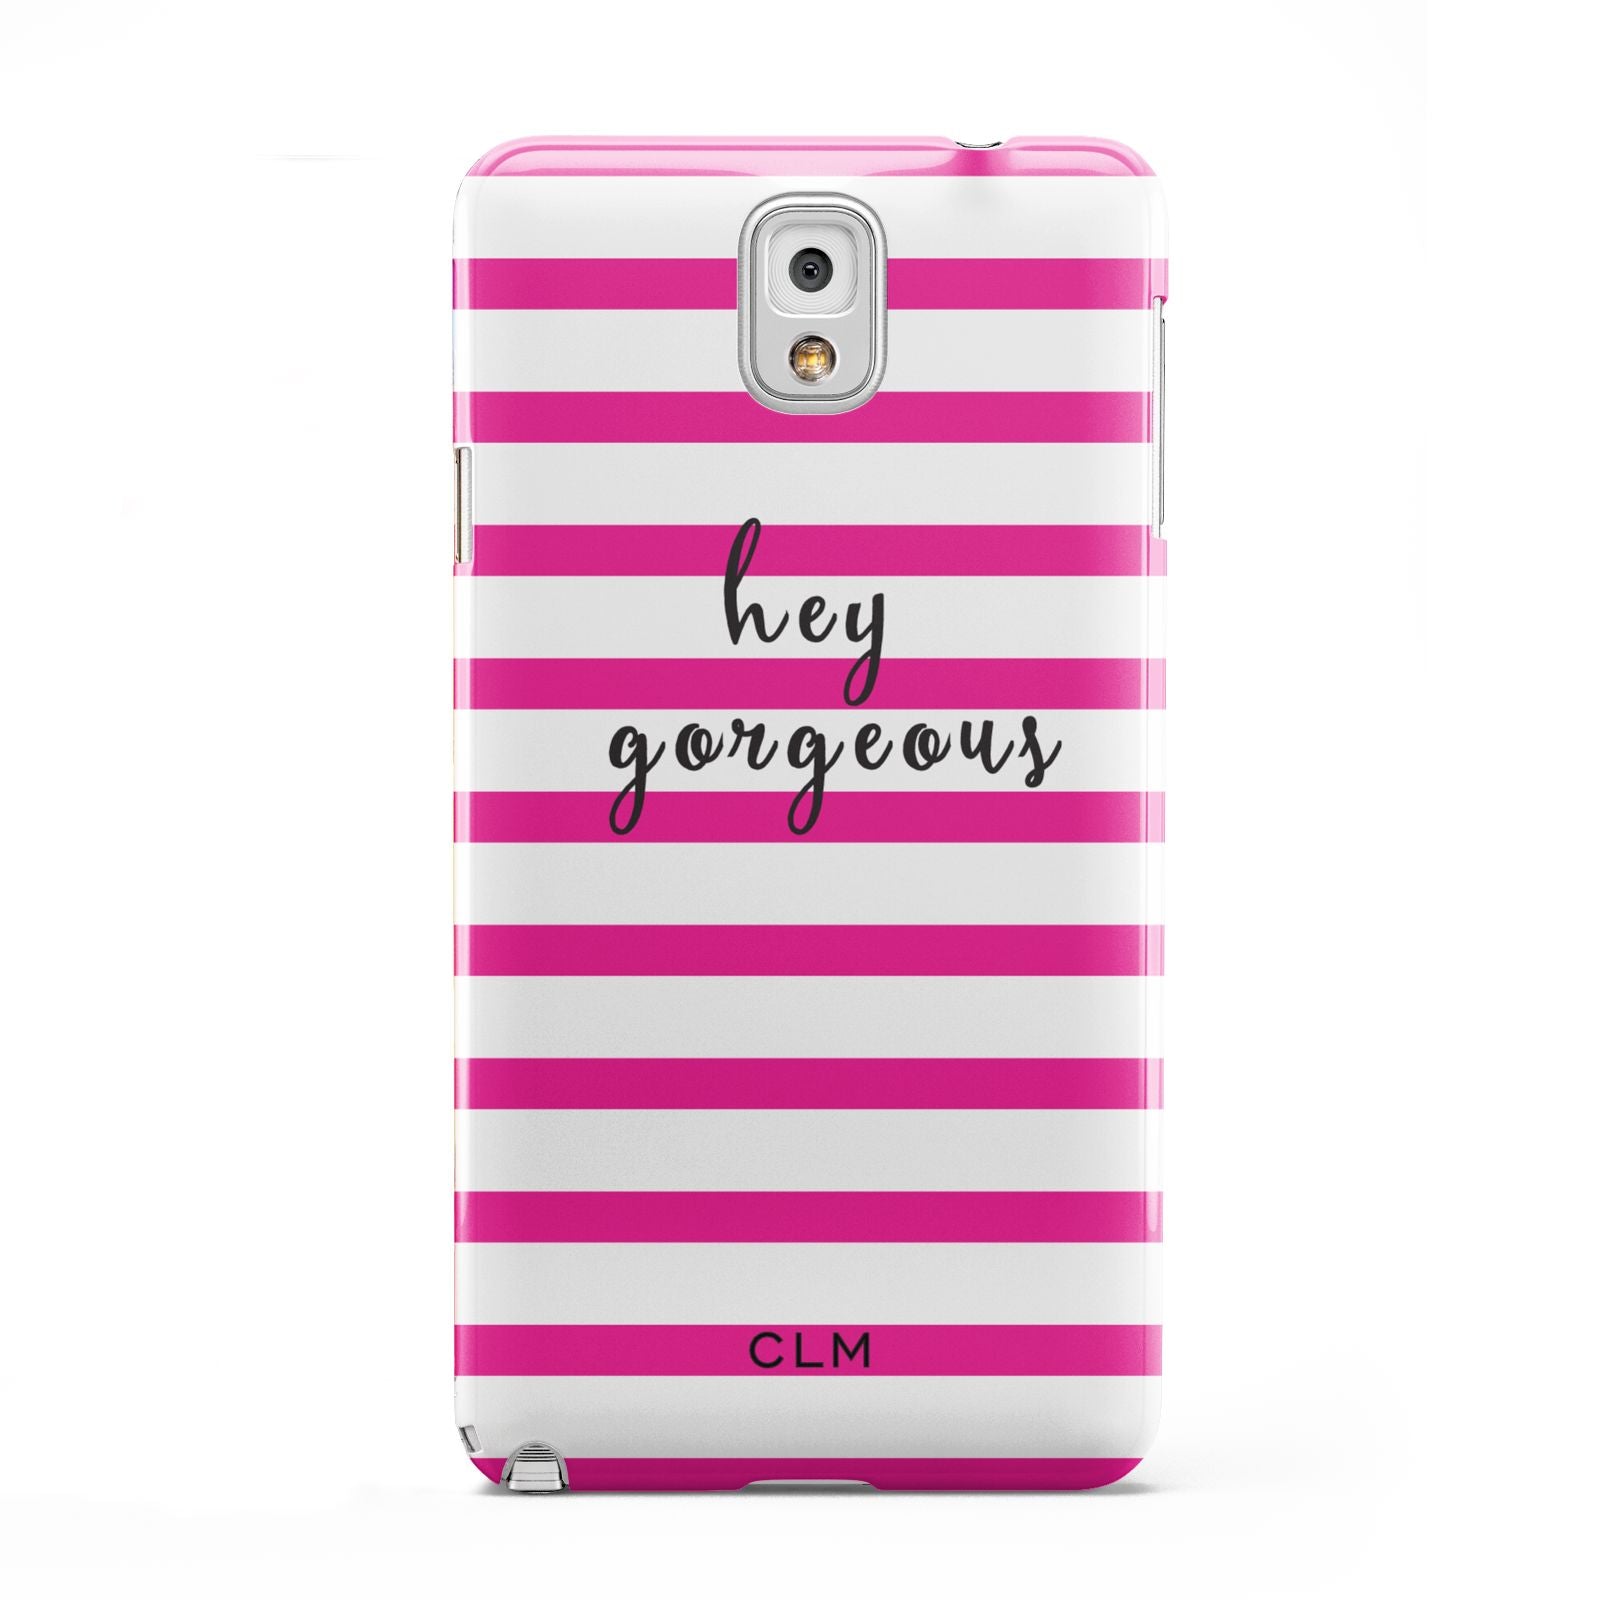 Personalised Initials Pink Striped Samsung Galaxy Note 3 Case